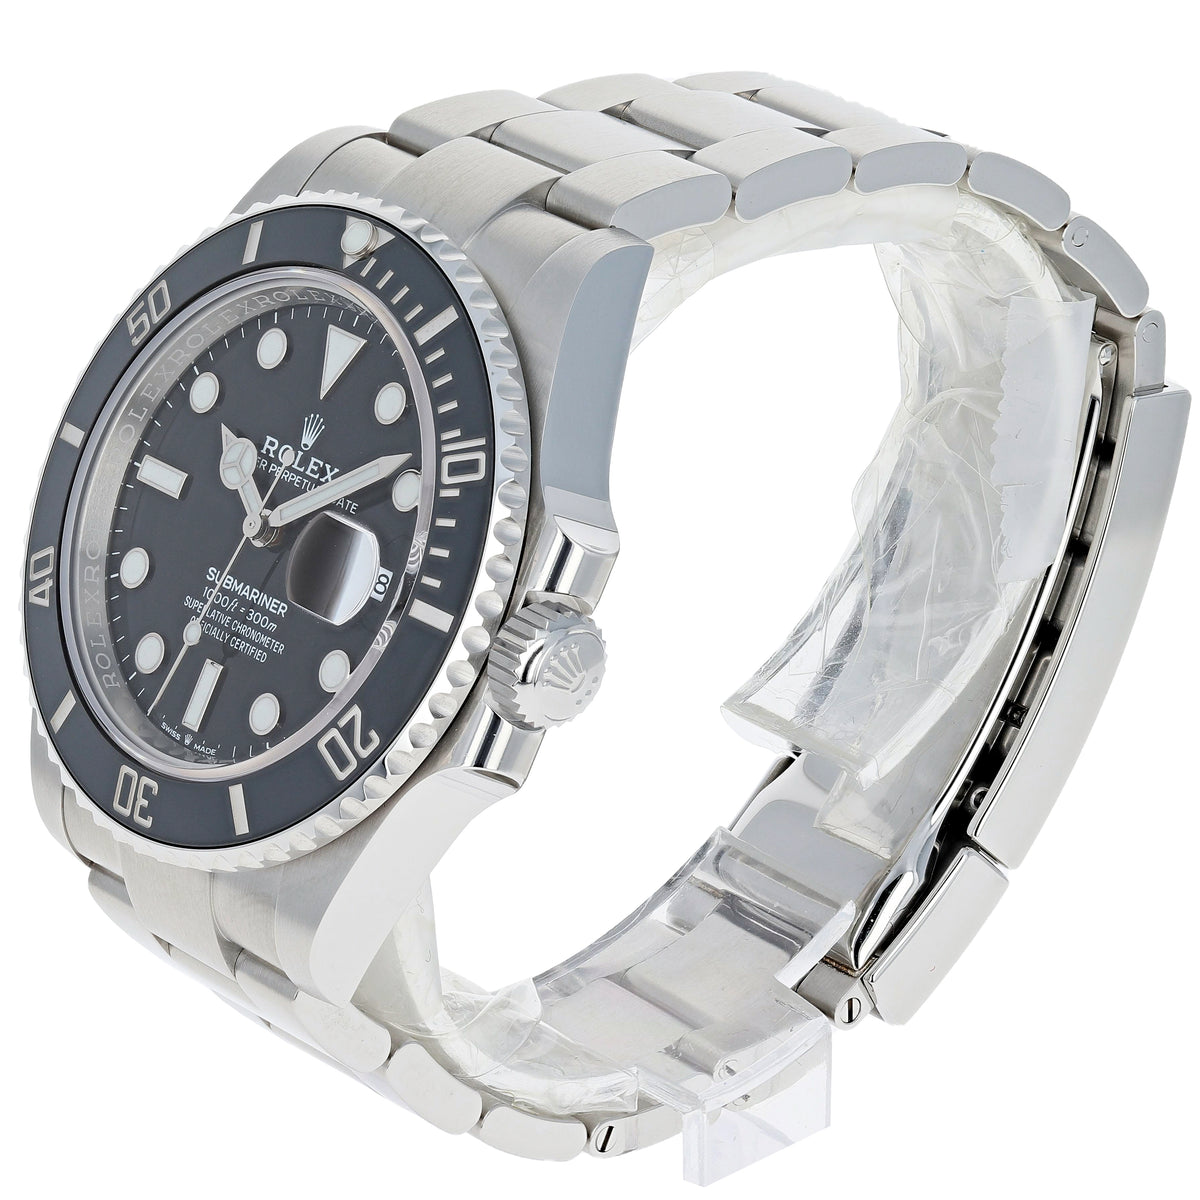 Rolex Submariner Reference 126610LN, A Stainless Steel Automatic